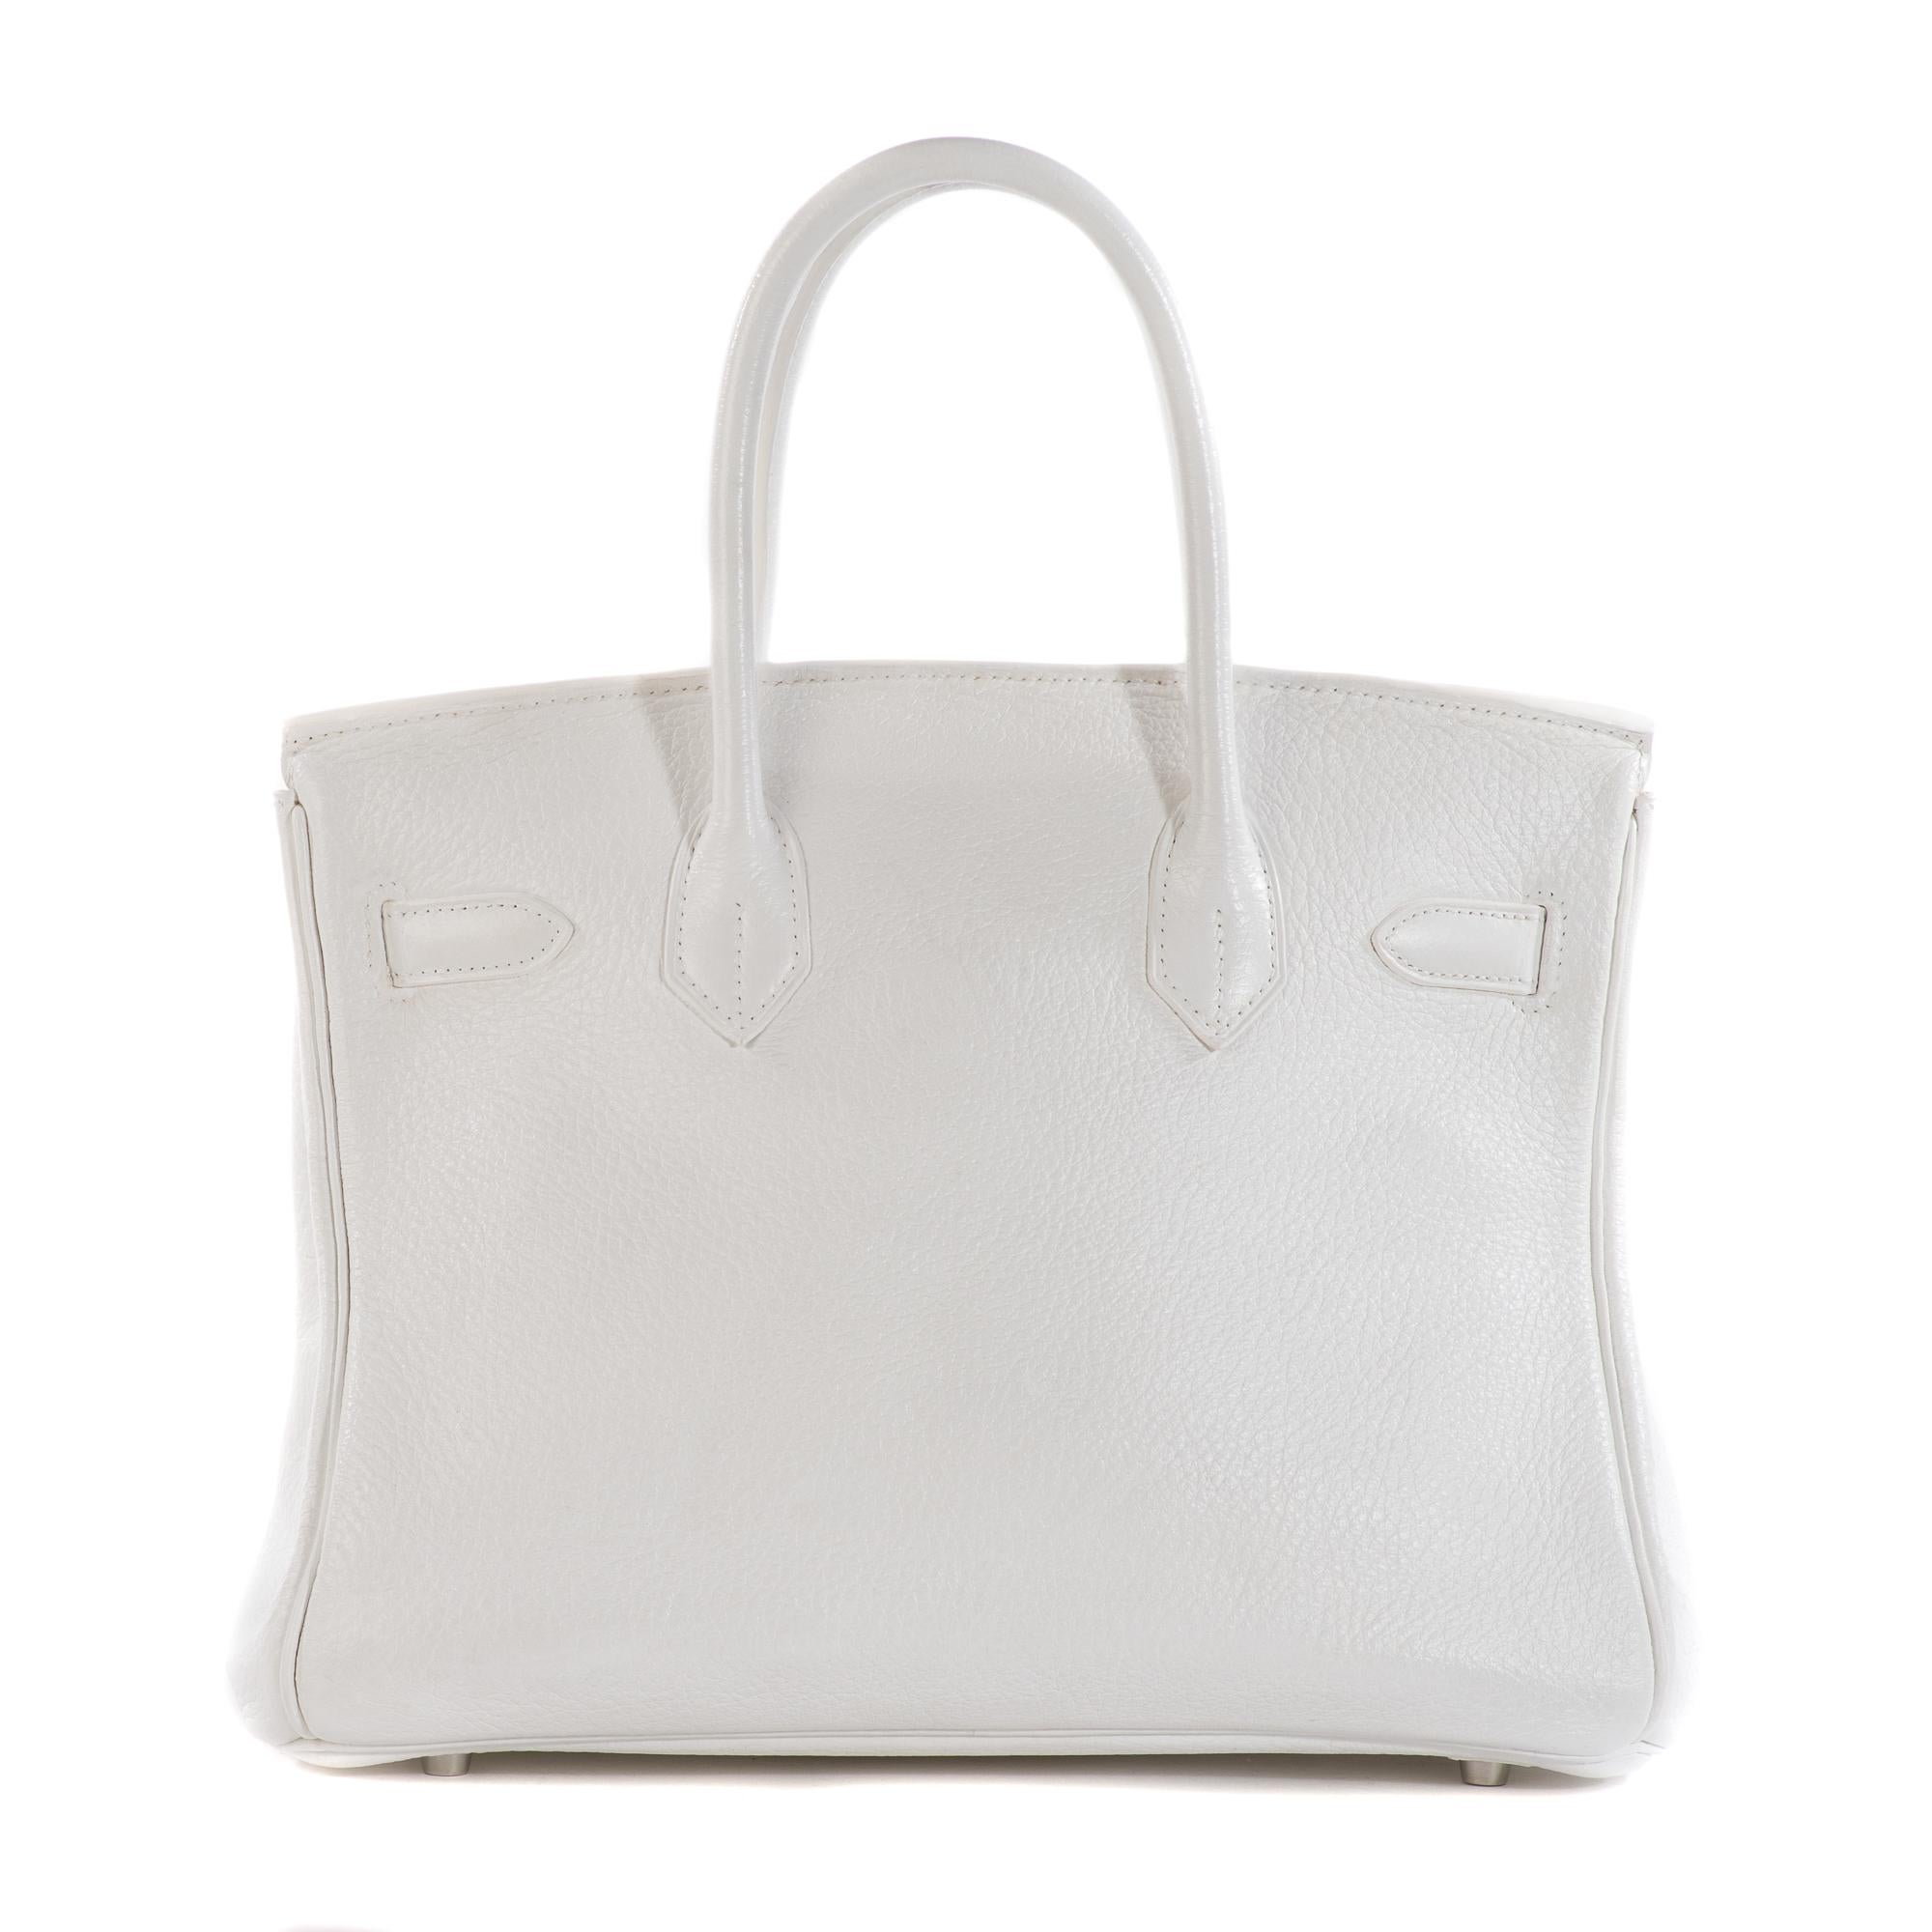 The iconic Hermes Birkin 30 cm handbag in white togo leather, palladium metal hardware, double gold leather handle for hand carrying.

Inner lining in gold leather, a zipped pocket, a patch pocket.
Sold with zipper, key, padlock, bell.
Signature: